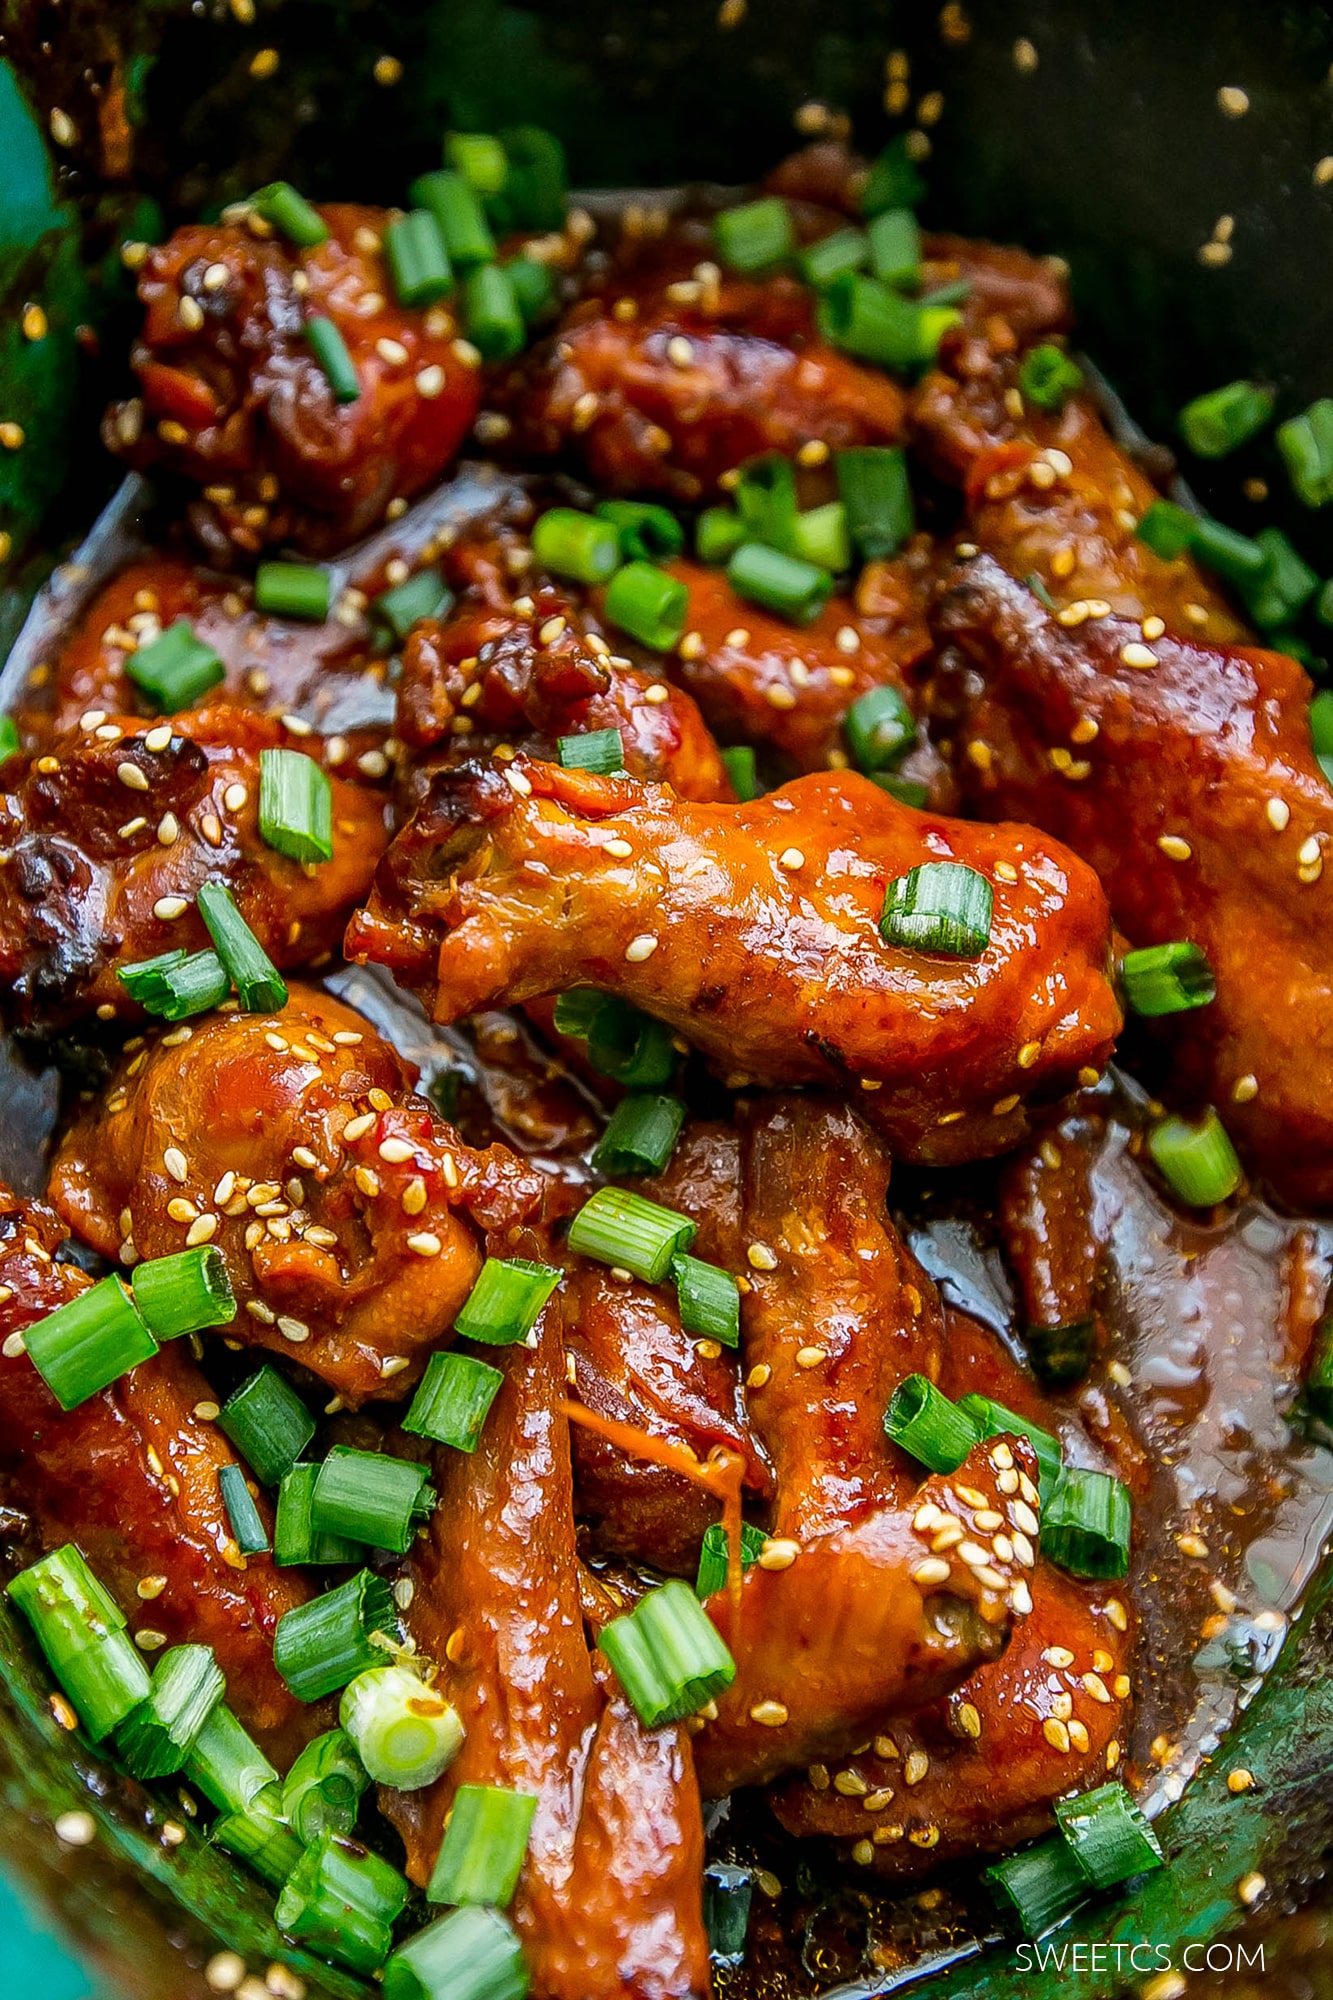 honey soy wings you can make in a slow cooker- so good!